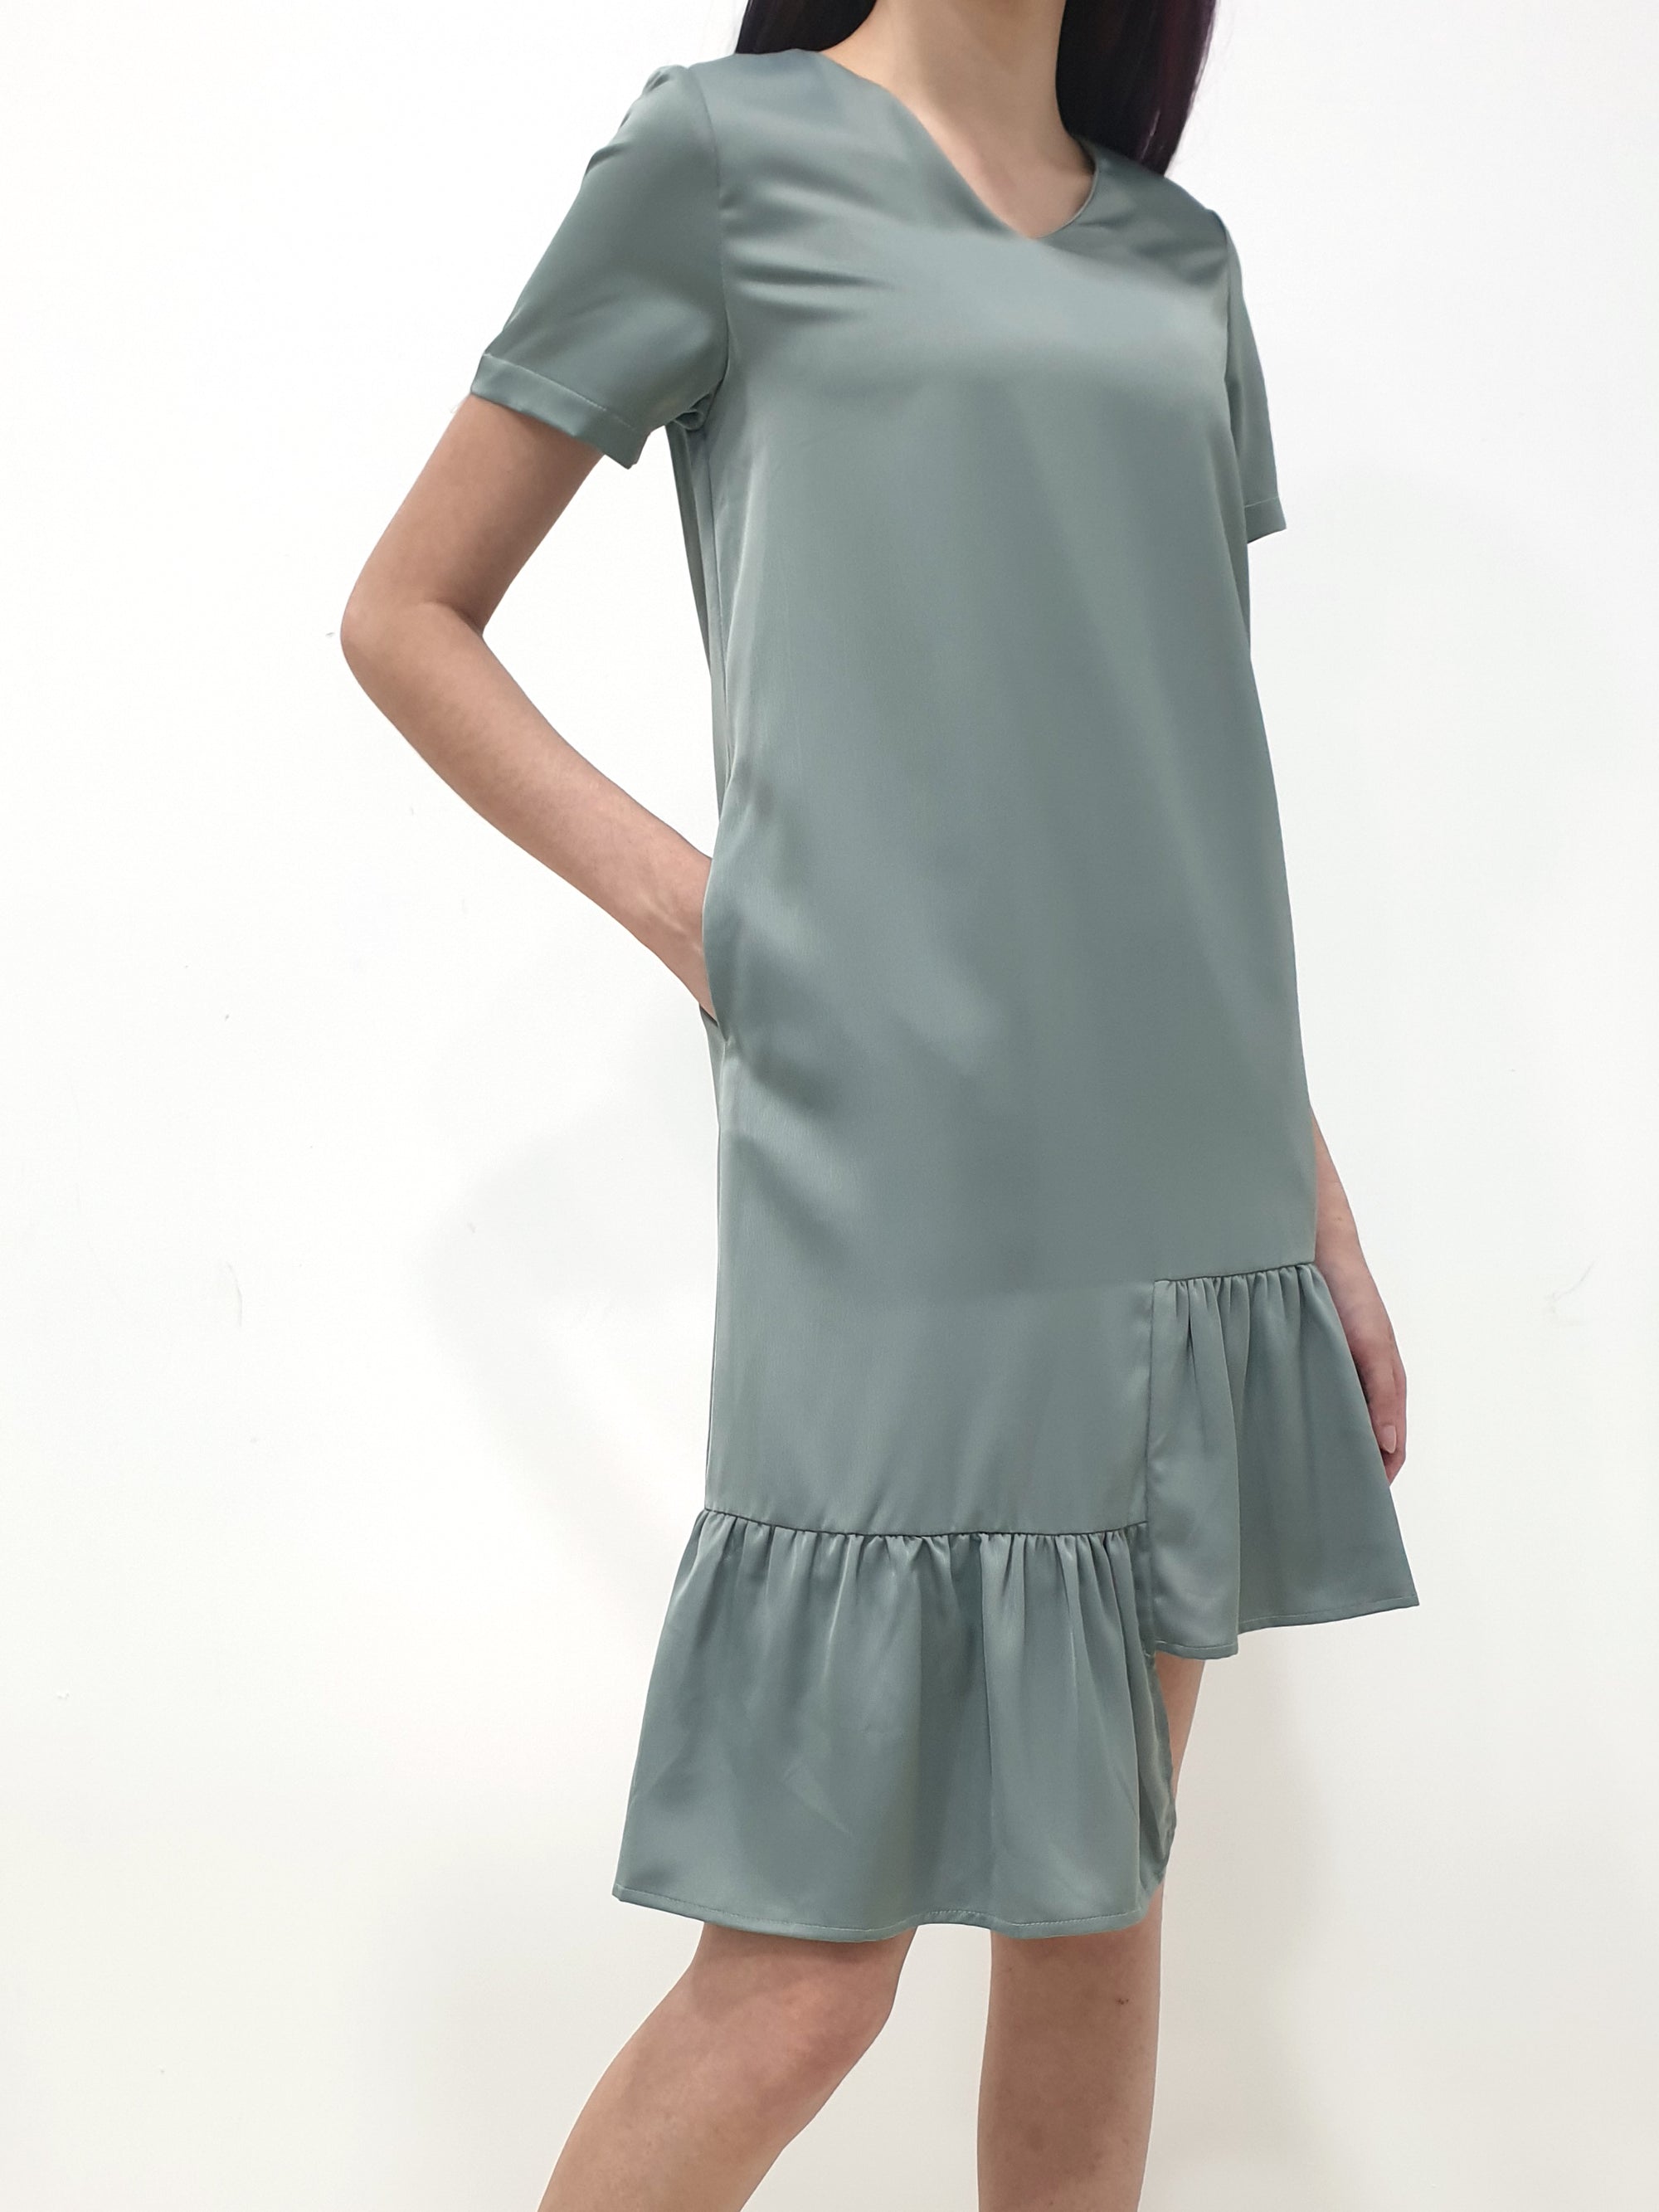 Frosty Hi Low Dress - Green (Non-returnable) - Ferlicious